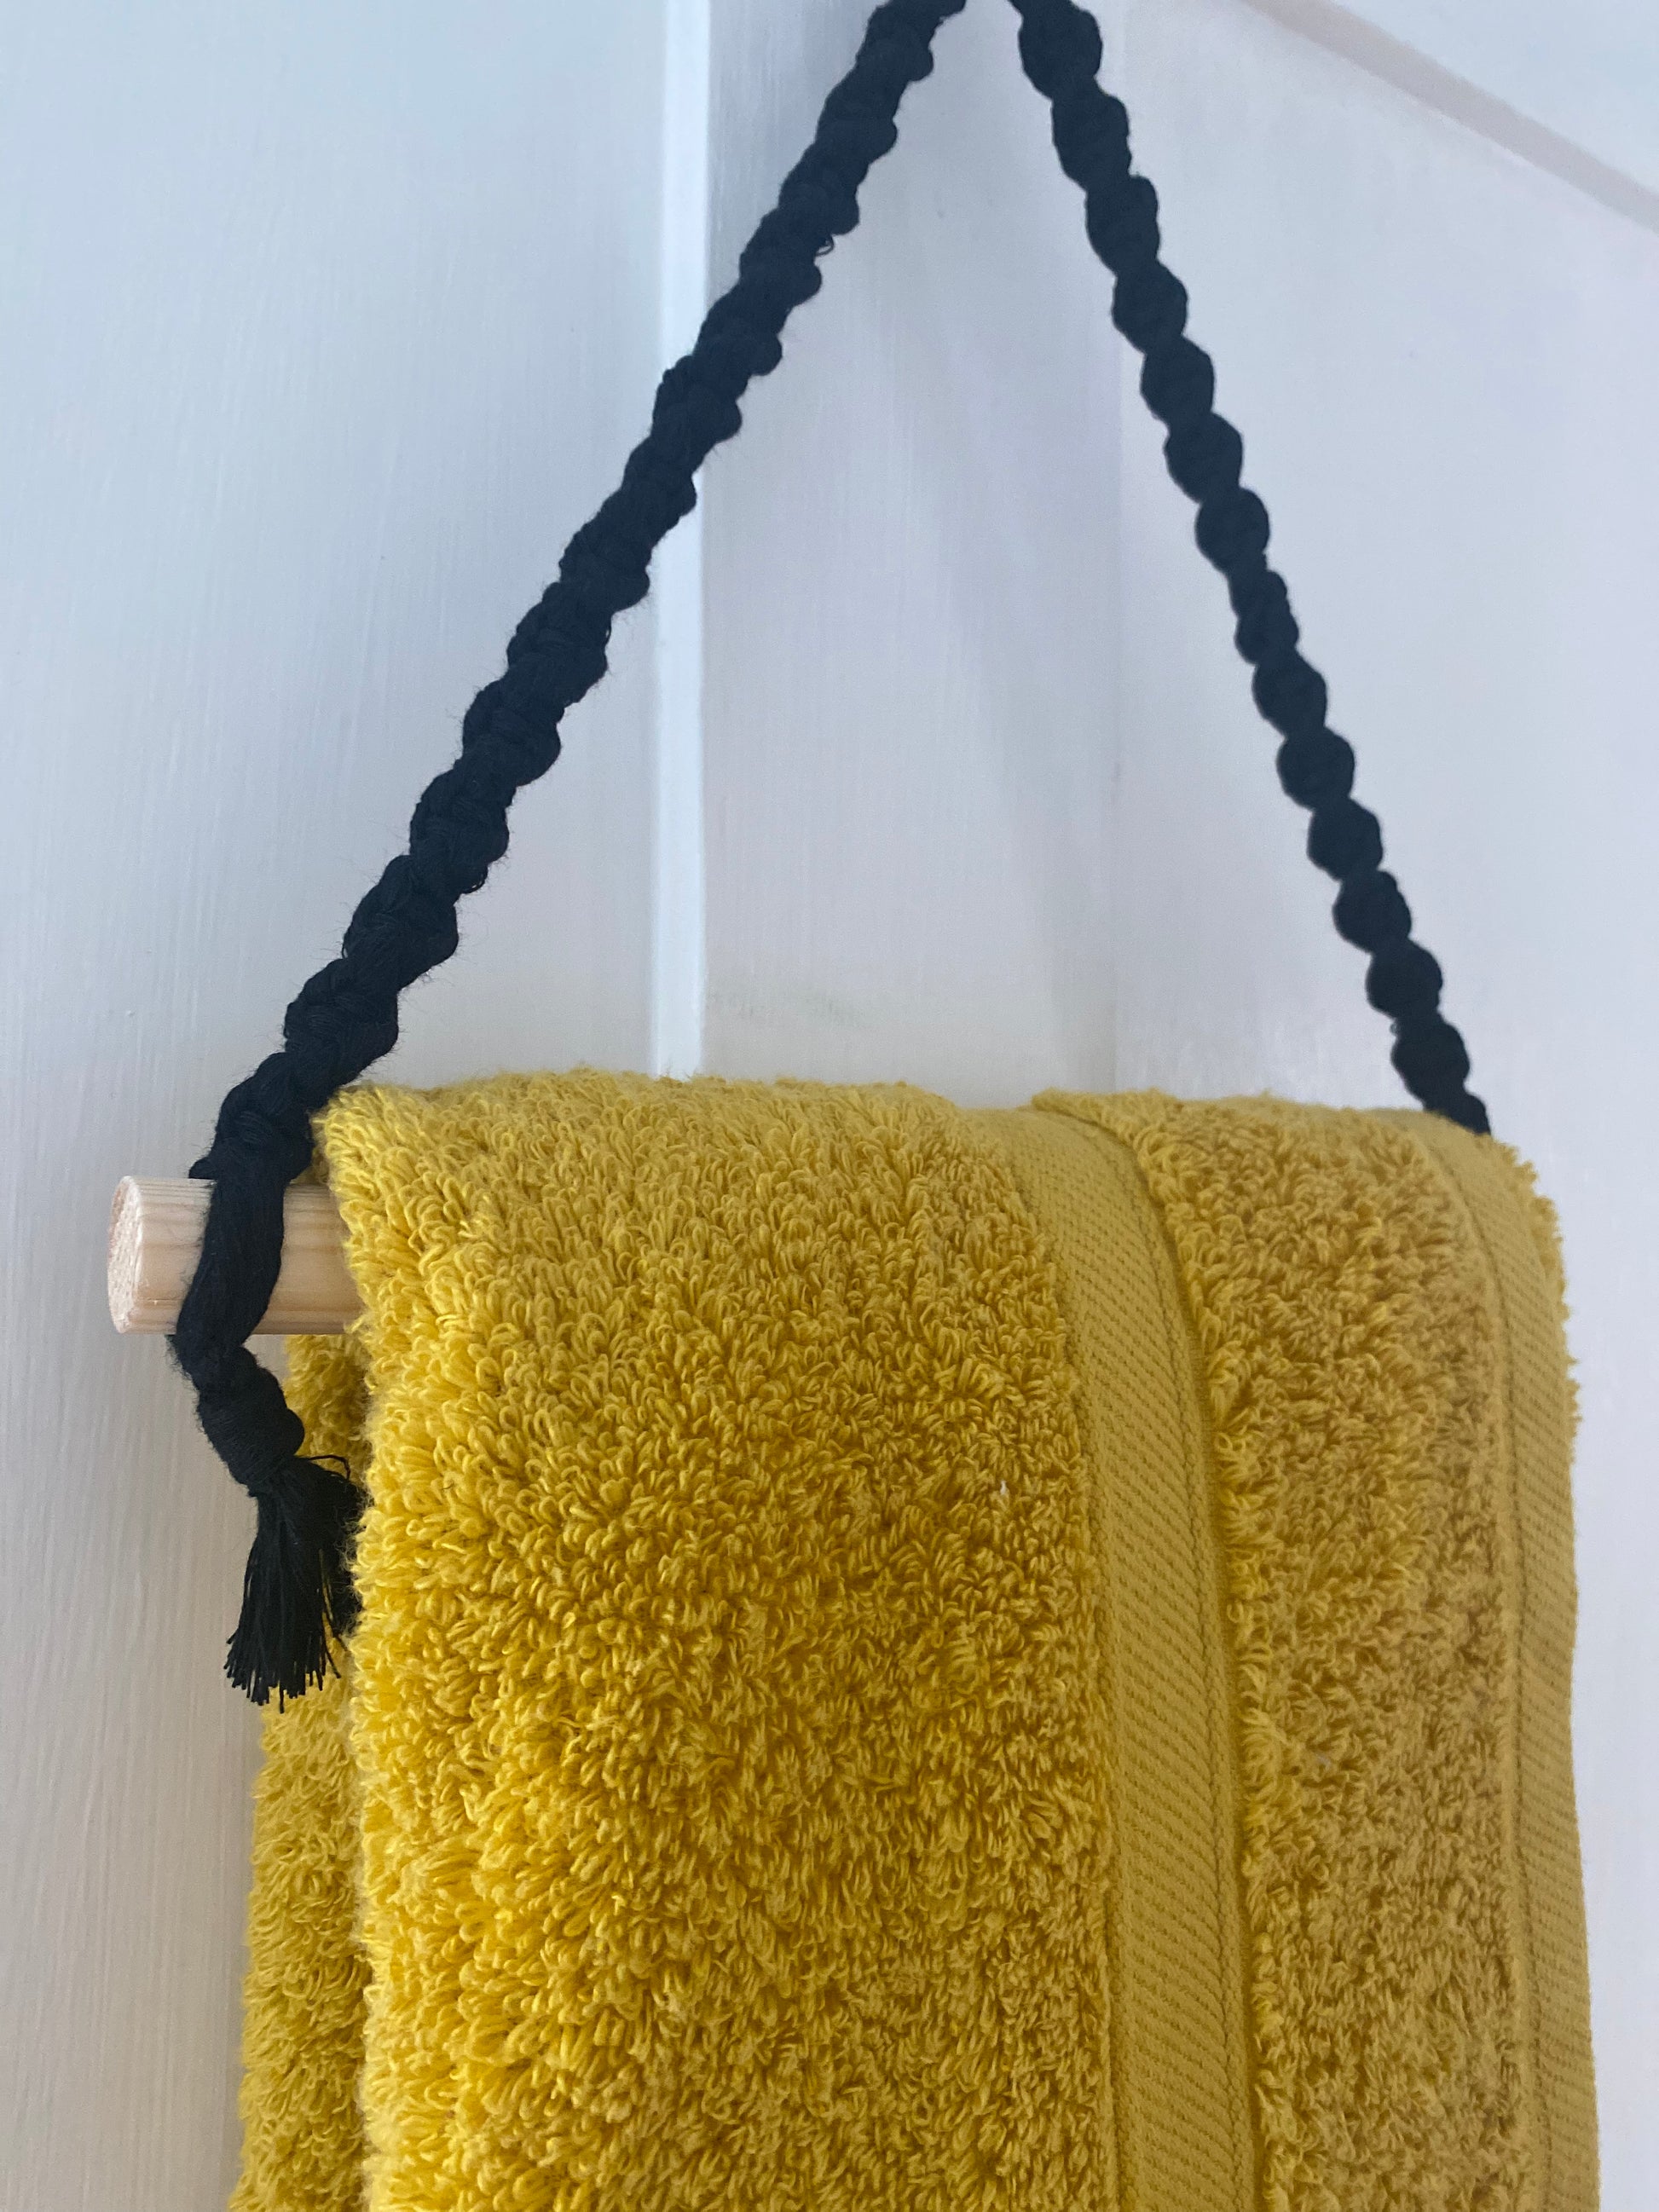 A fluffy yellow towel, made of sustainable recycled cotton, hangs on a white door using an eco-friendly Hand towel holder crafted with a black braided rope and a wooden dowel by Macra-Made-With-Love. The towel features a decorative vertical stripe in the middle, creating a neat and stylish display.